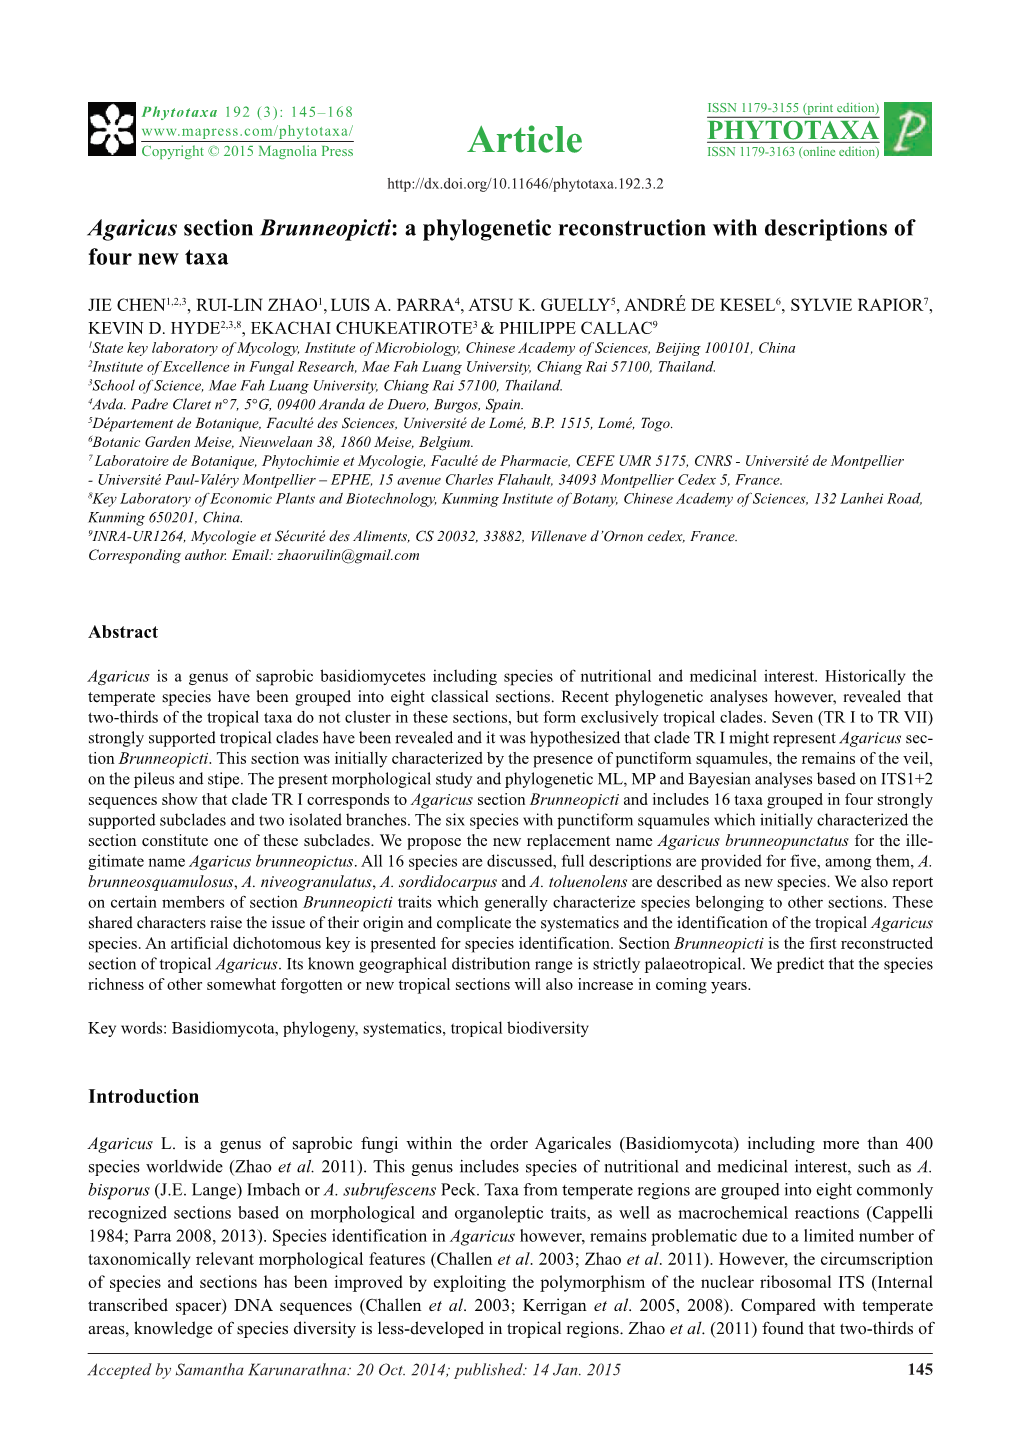 Agaricus Section Brunneopicti: a Phylogenetic Reconstruction with Descriptions of Four New Taxa